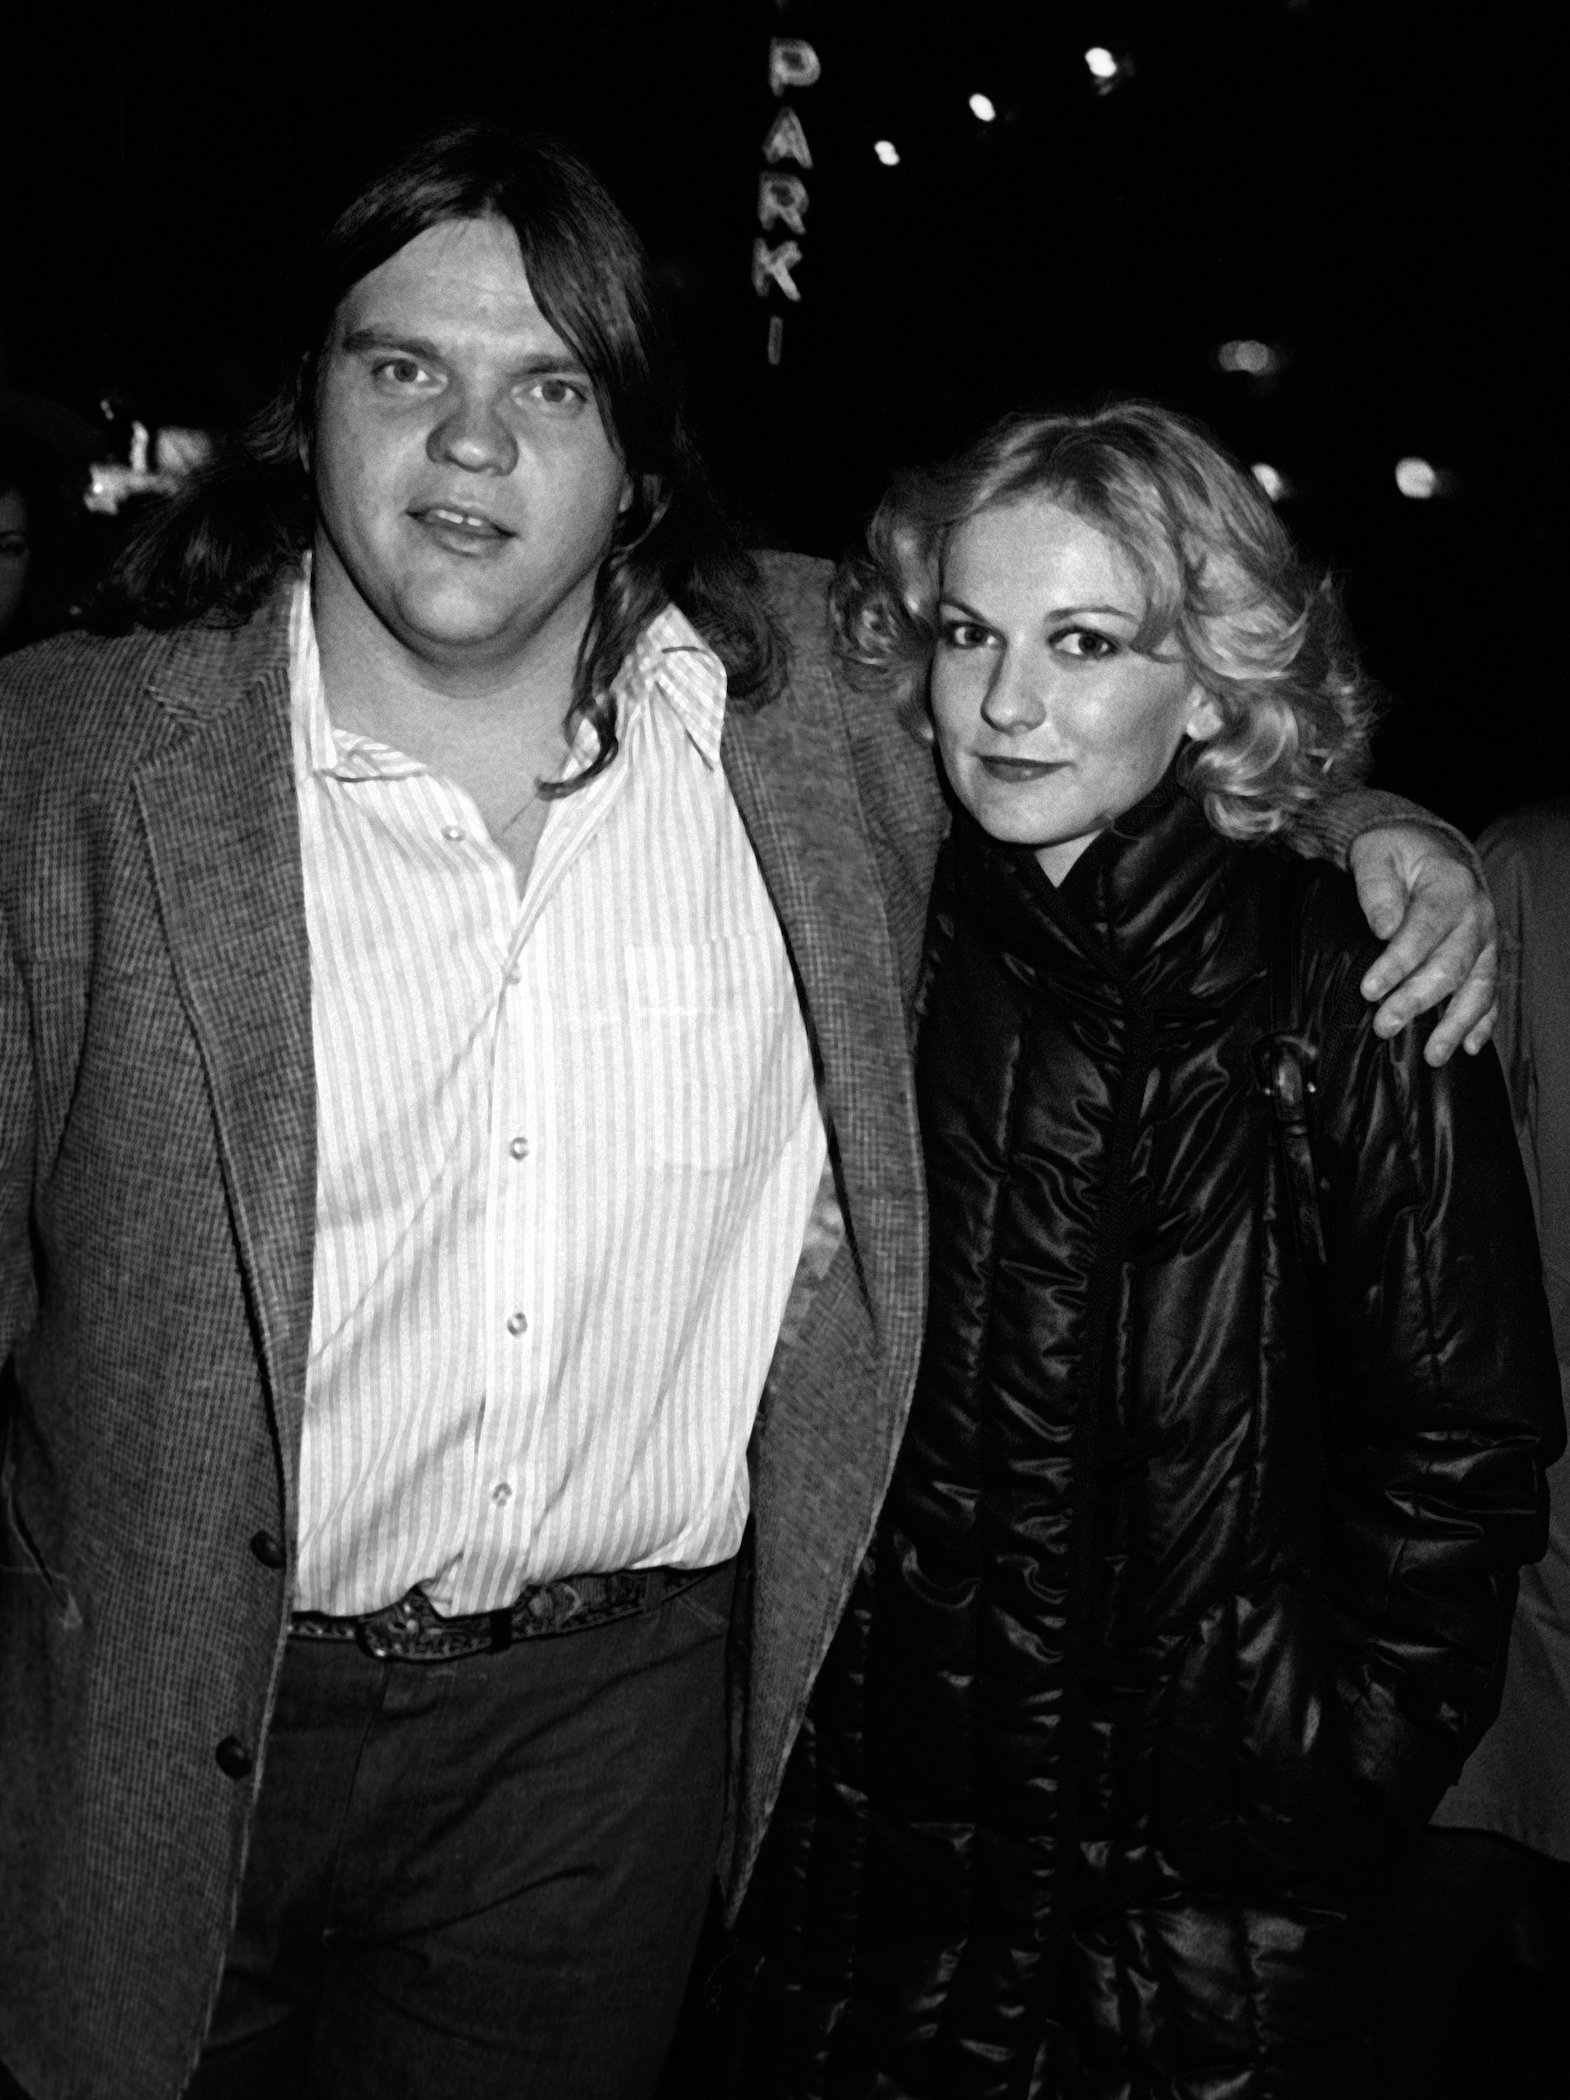 A black and white photo of Meat Loaf and ex-wife Leslie Aday